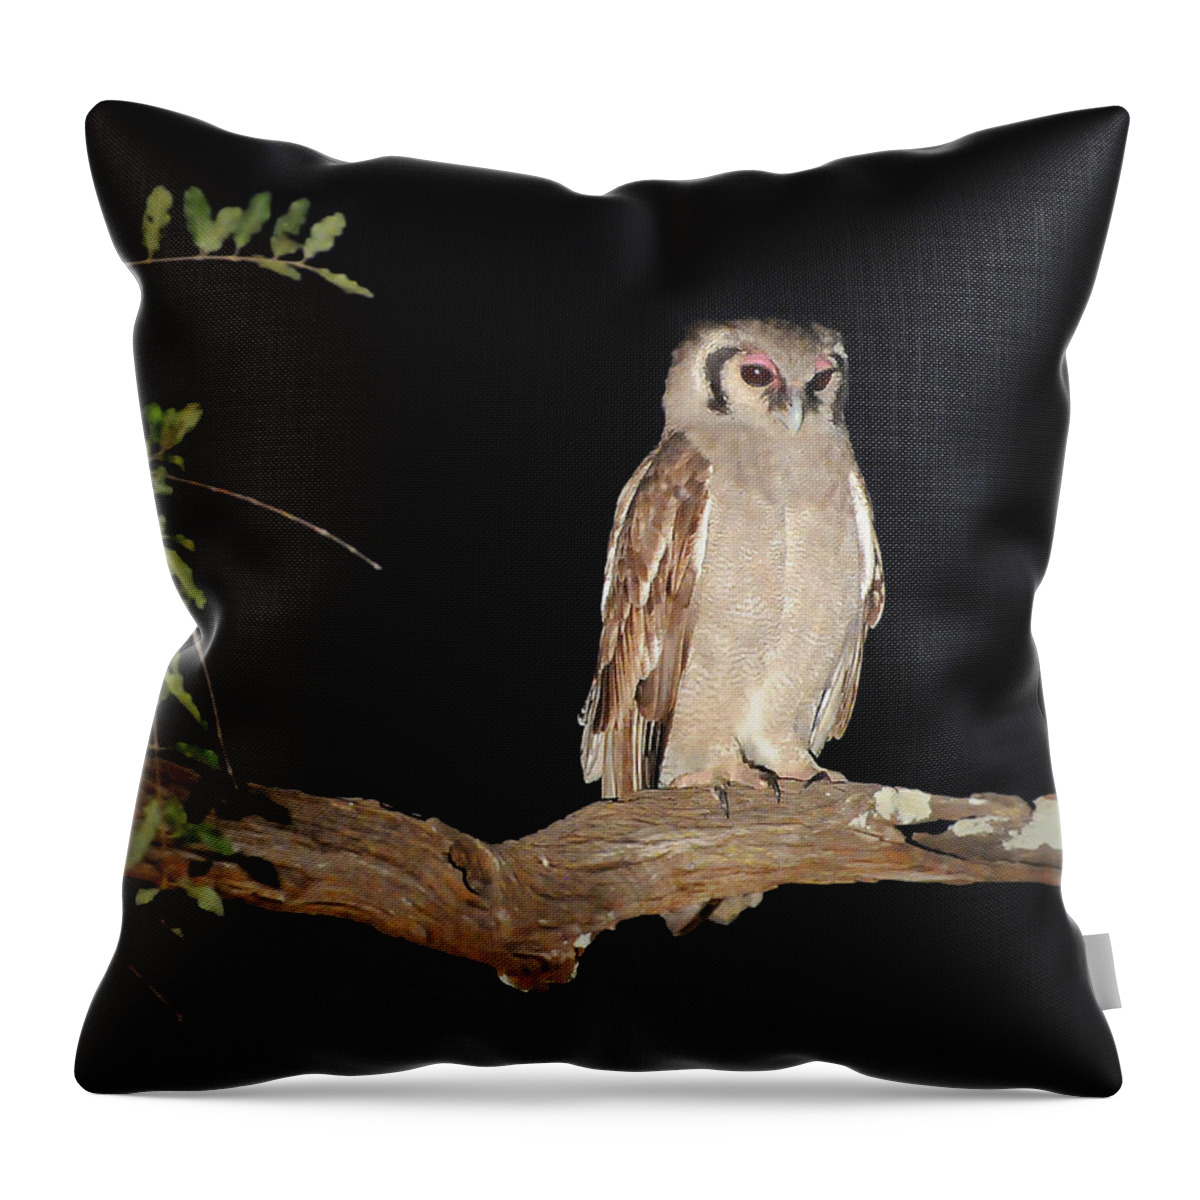 Giant Throw Pillow featuring the photograph Giant Eagle Owl by Ted Keller